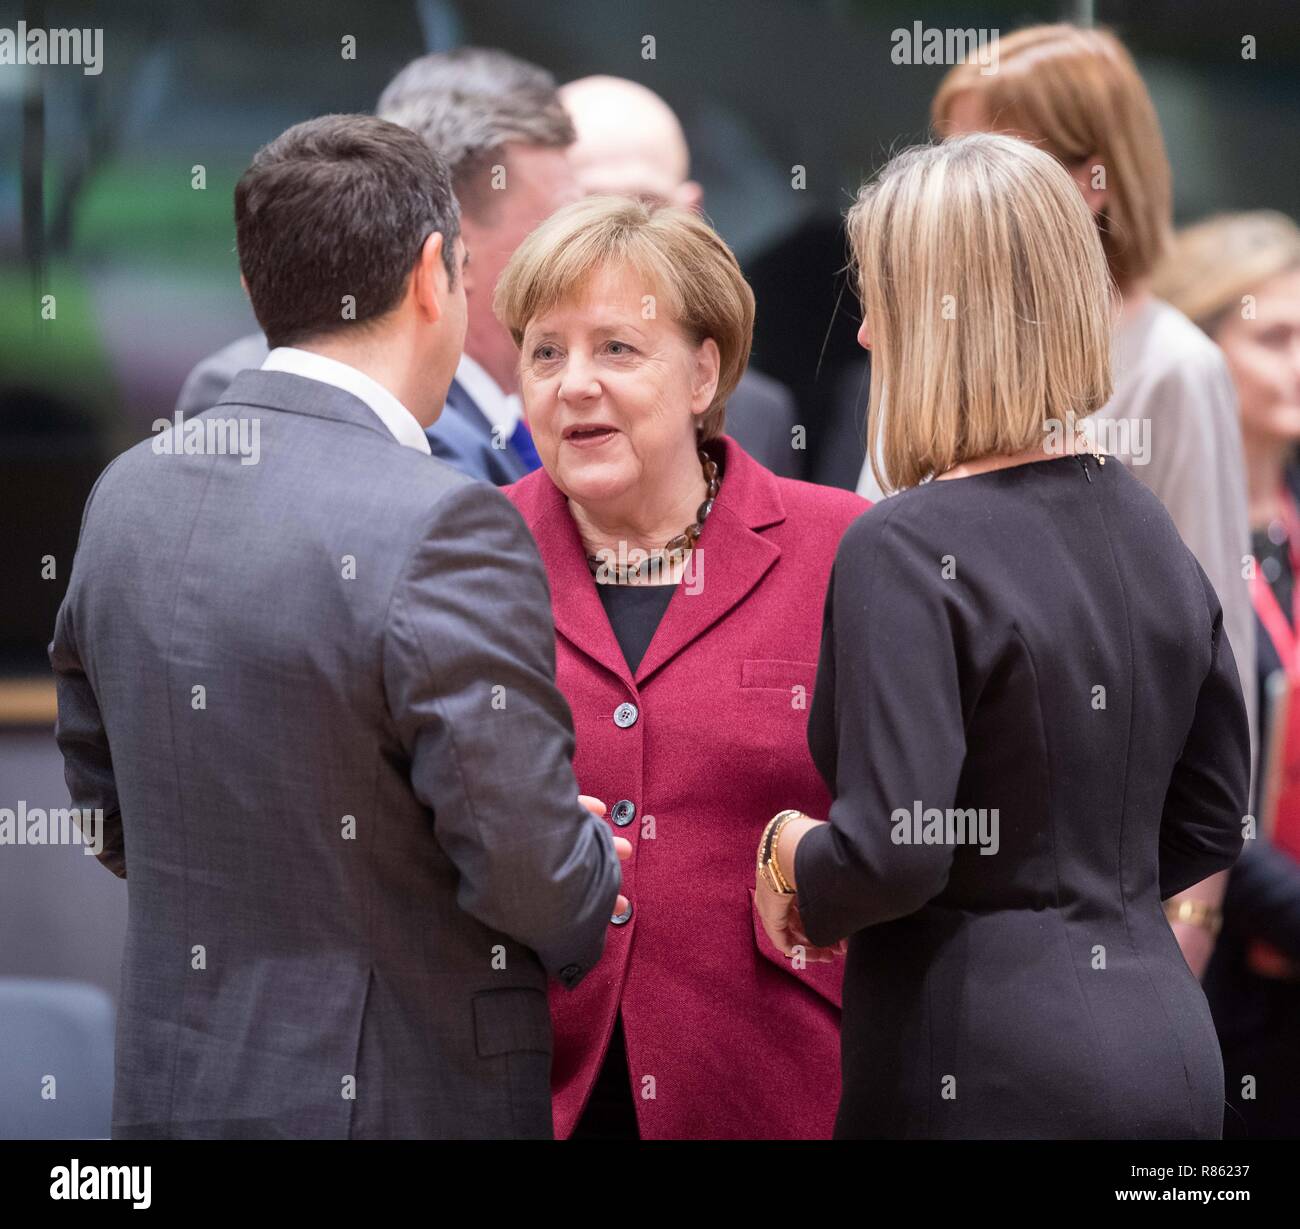 Brussels. 13th Dec, 2018. German Chancellor Angela Merkel (C) attends a round table meeting at a two-day EU summit in Brussels, Belgium, Dec. 13, 2018. Credit: Xinhua/Alamy Live News Stock Photo